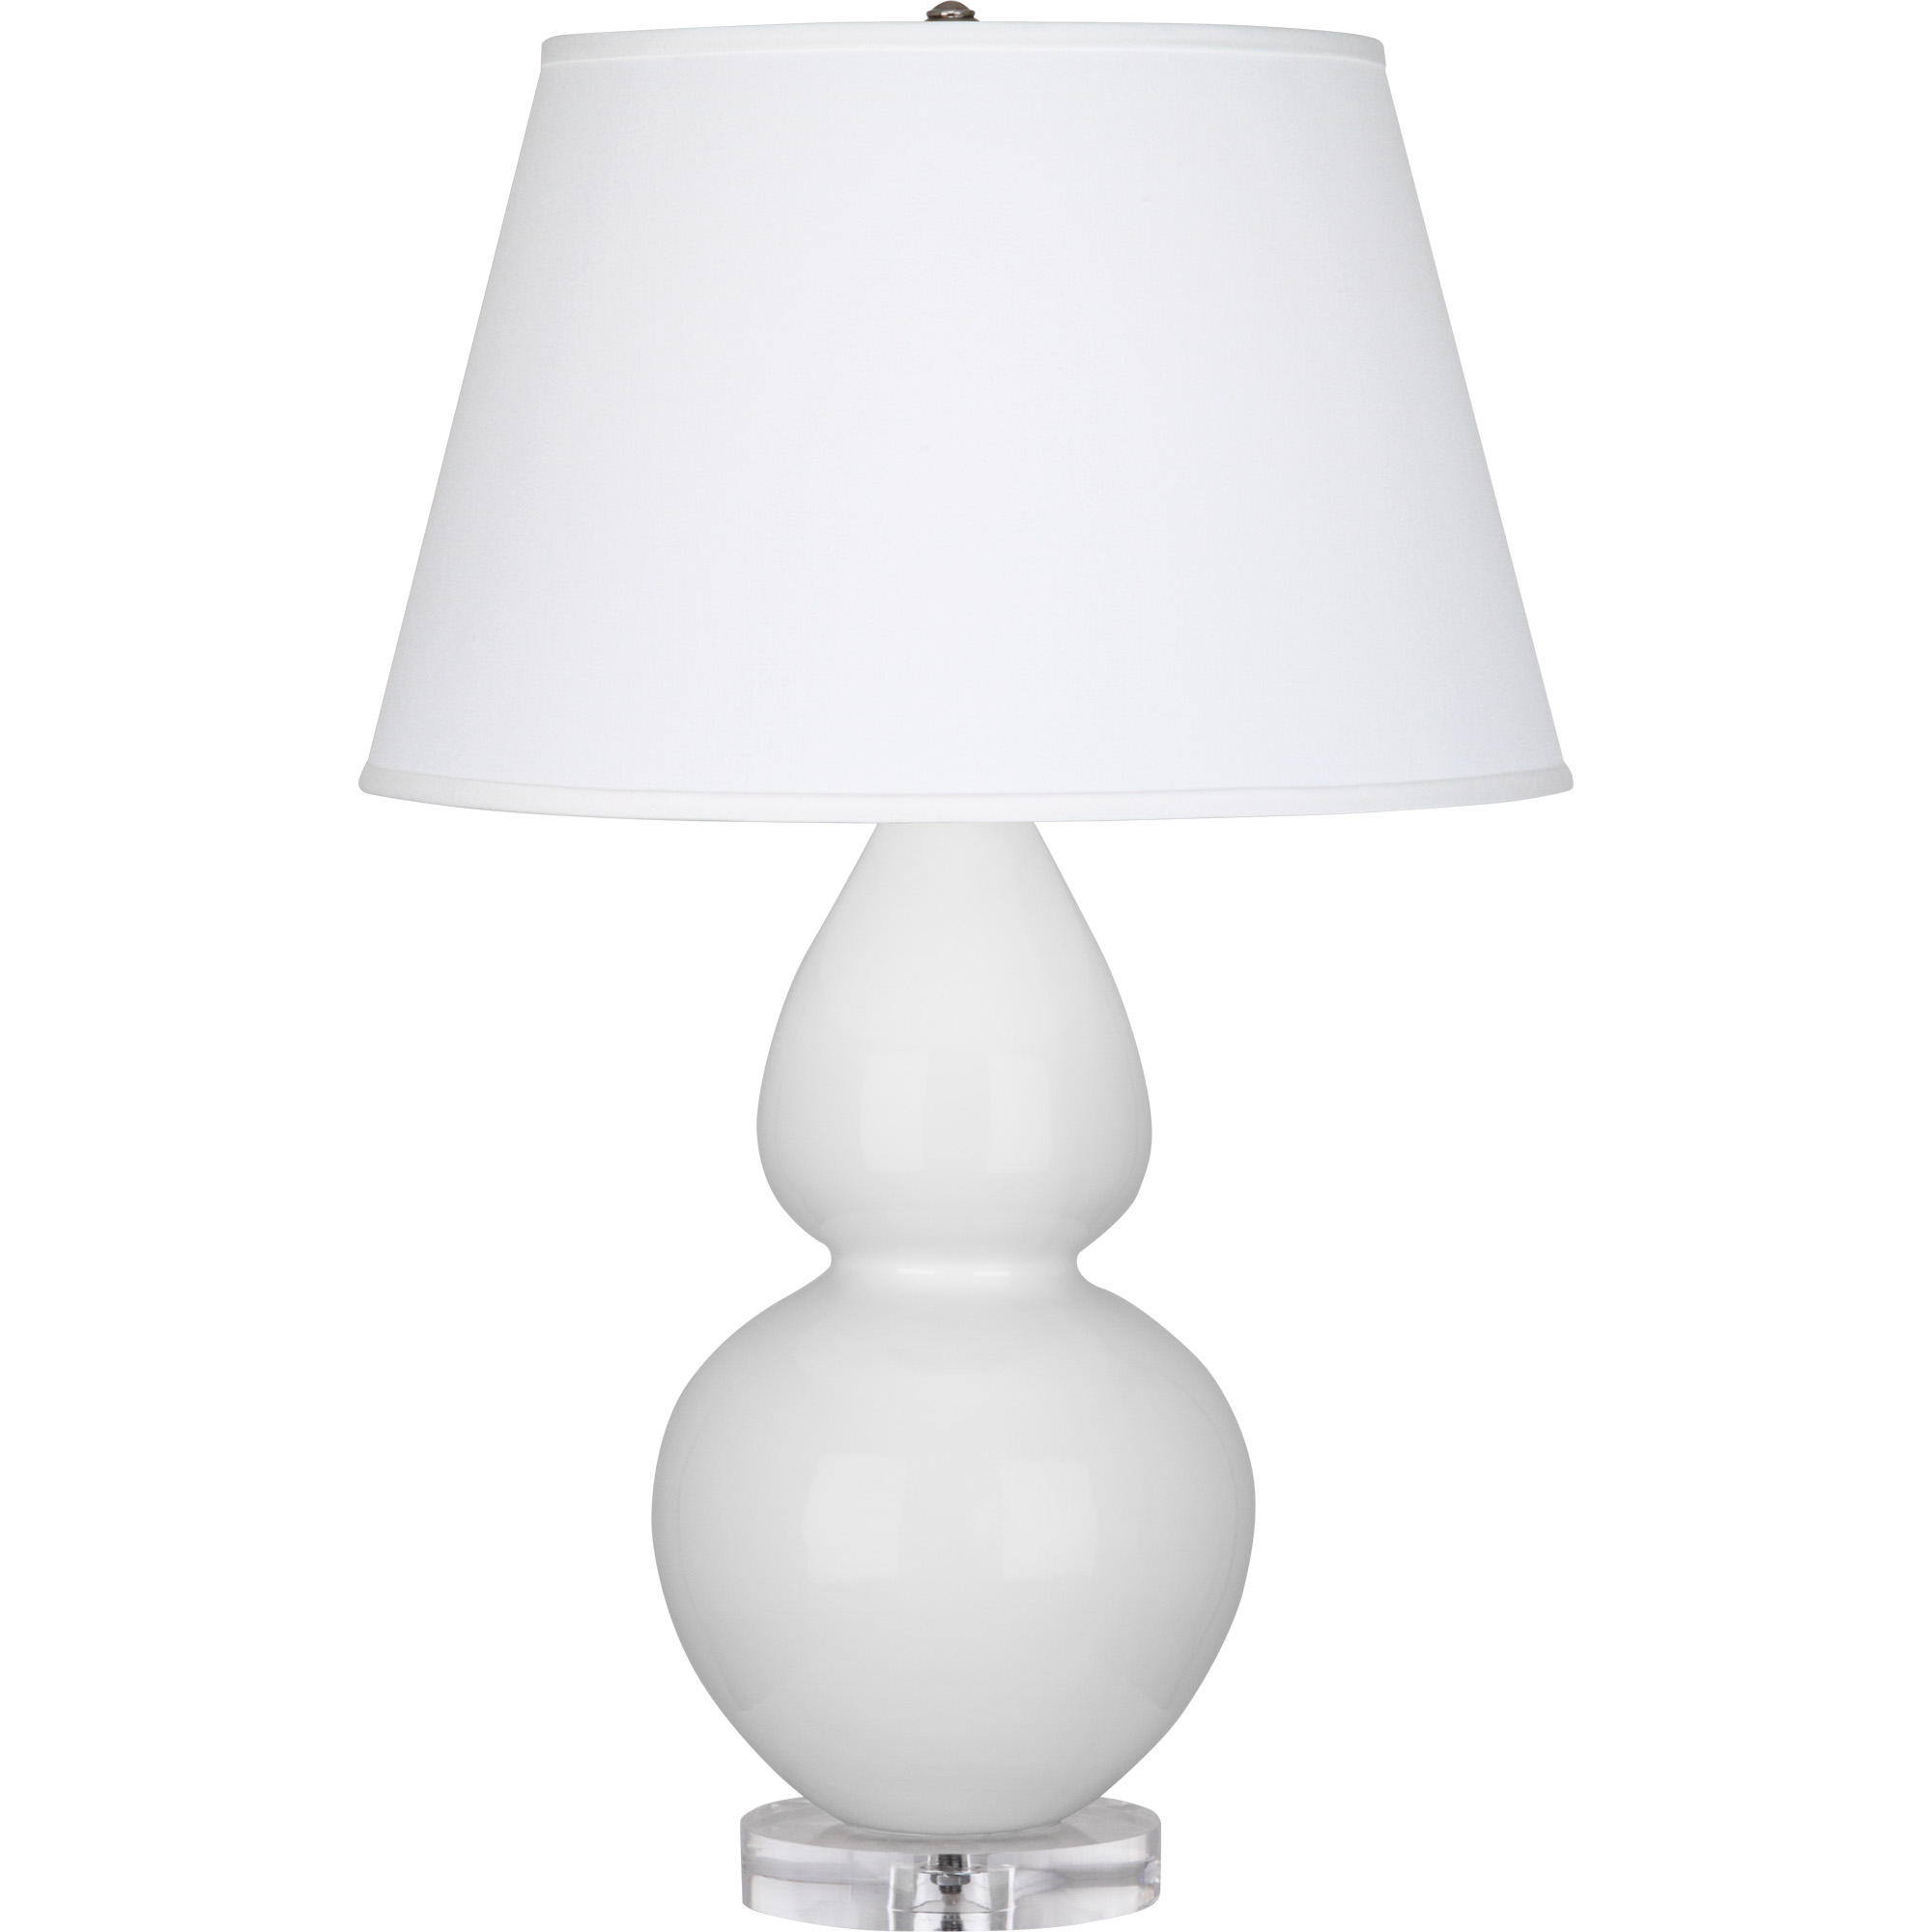 Double Gourd Table Lamp Style #DY23X